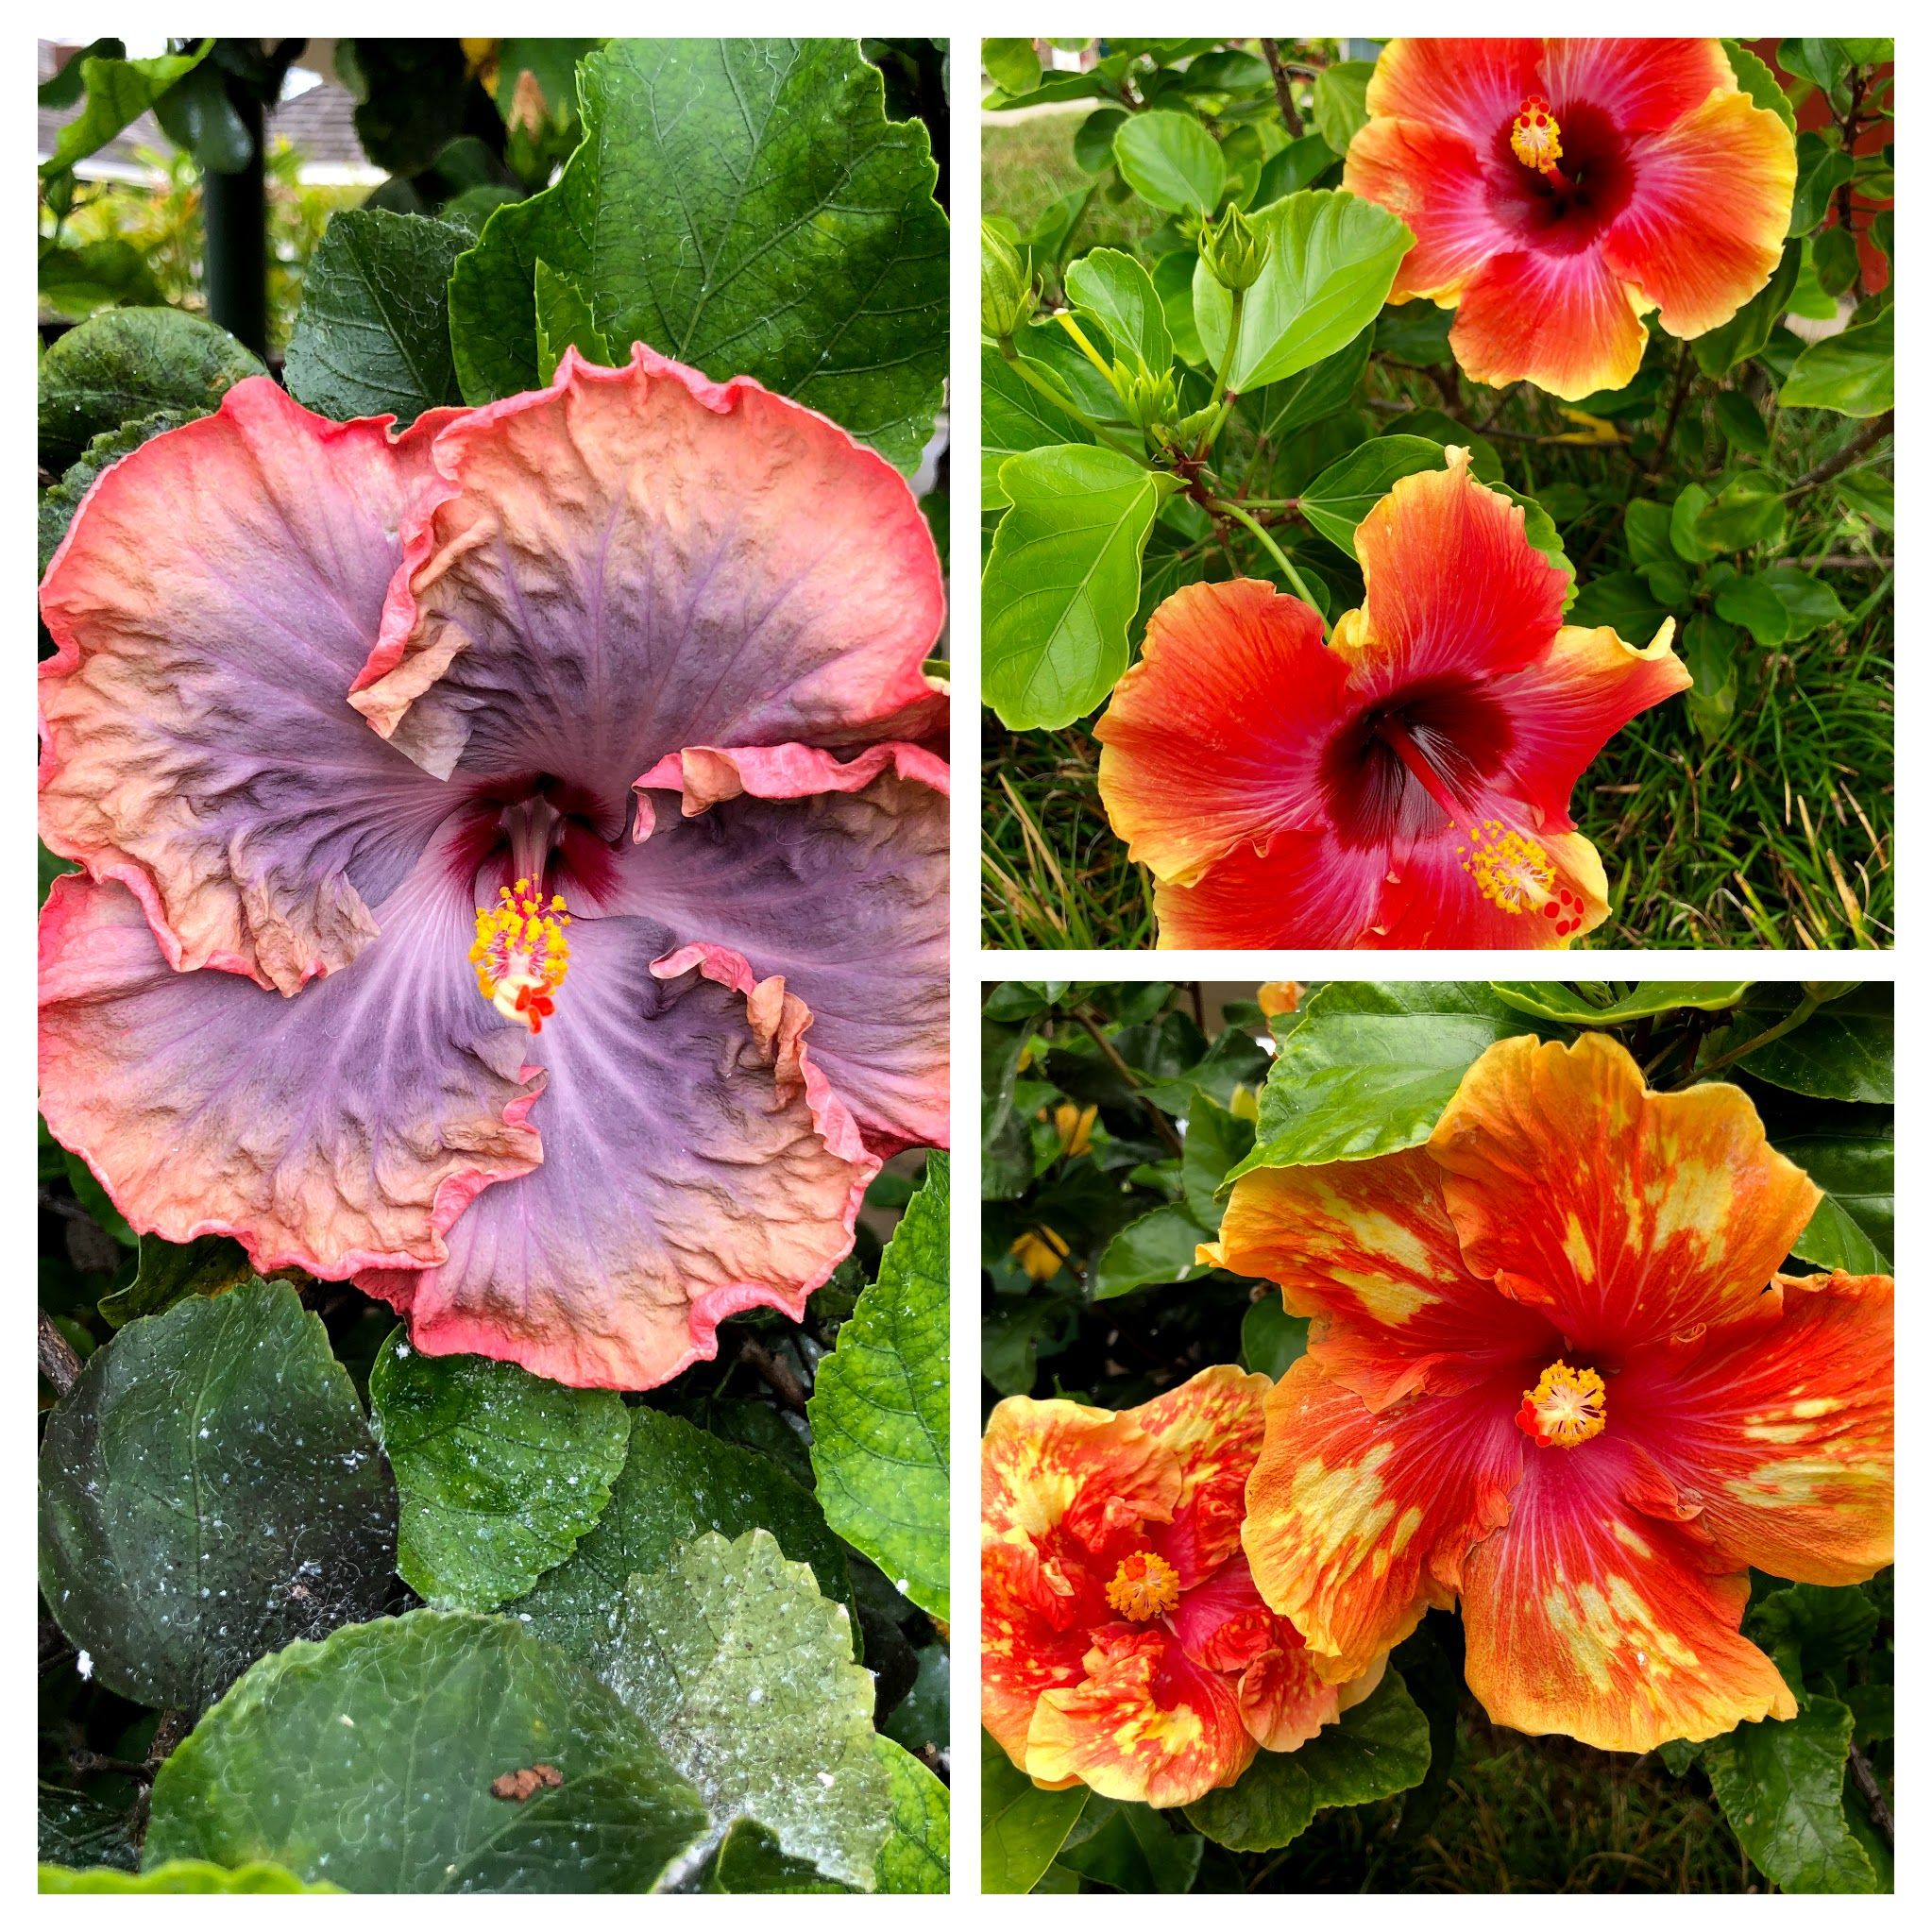 Caption: YESSS! These are for real. I never saw Bicolor Tropical Hibiscus flowers before I traveled to Kauai.  I was in complete awe when I saw these varieties. In person, the colors are even more vibrant. Photo: @karenvchin